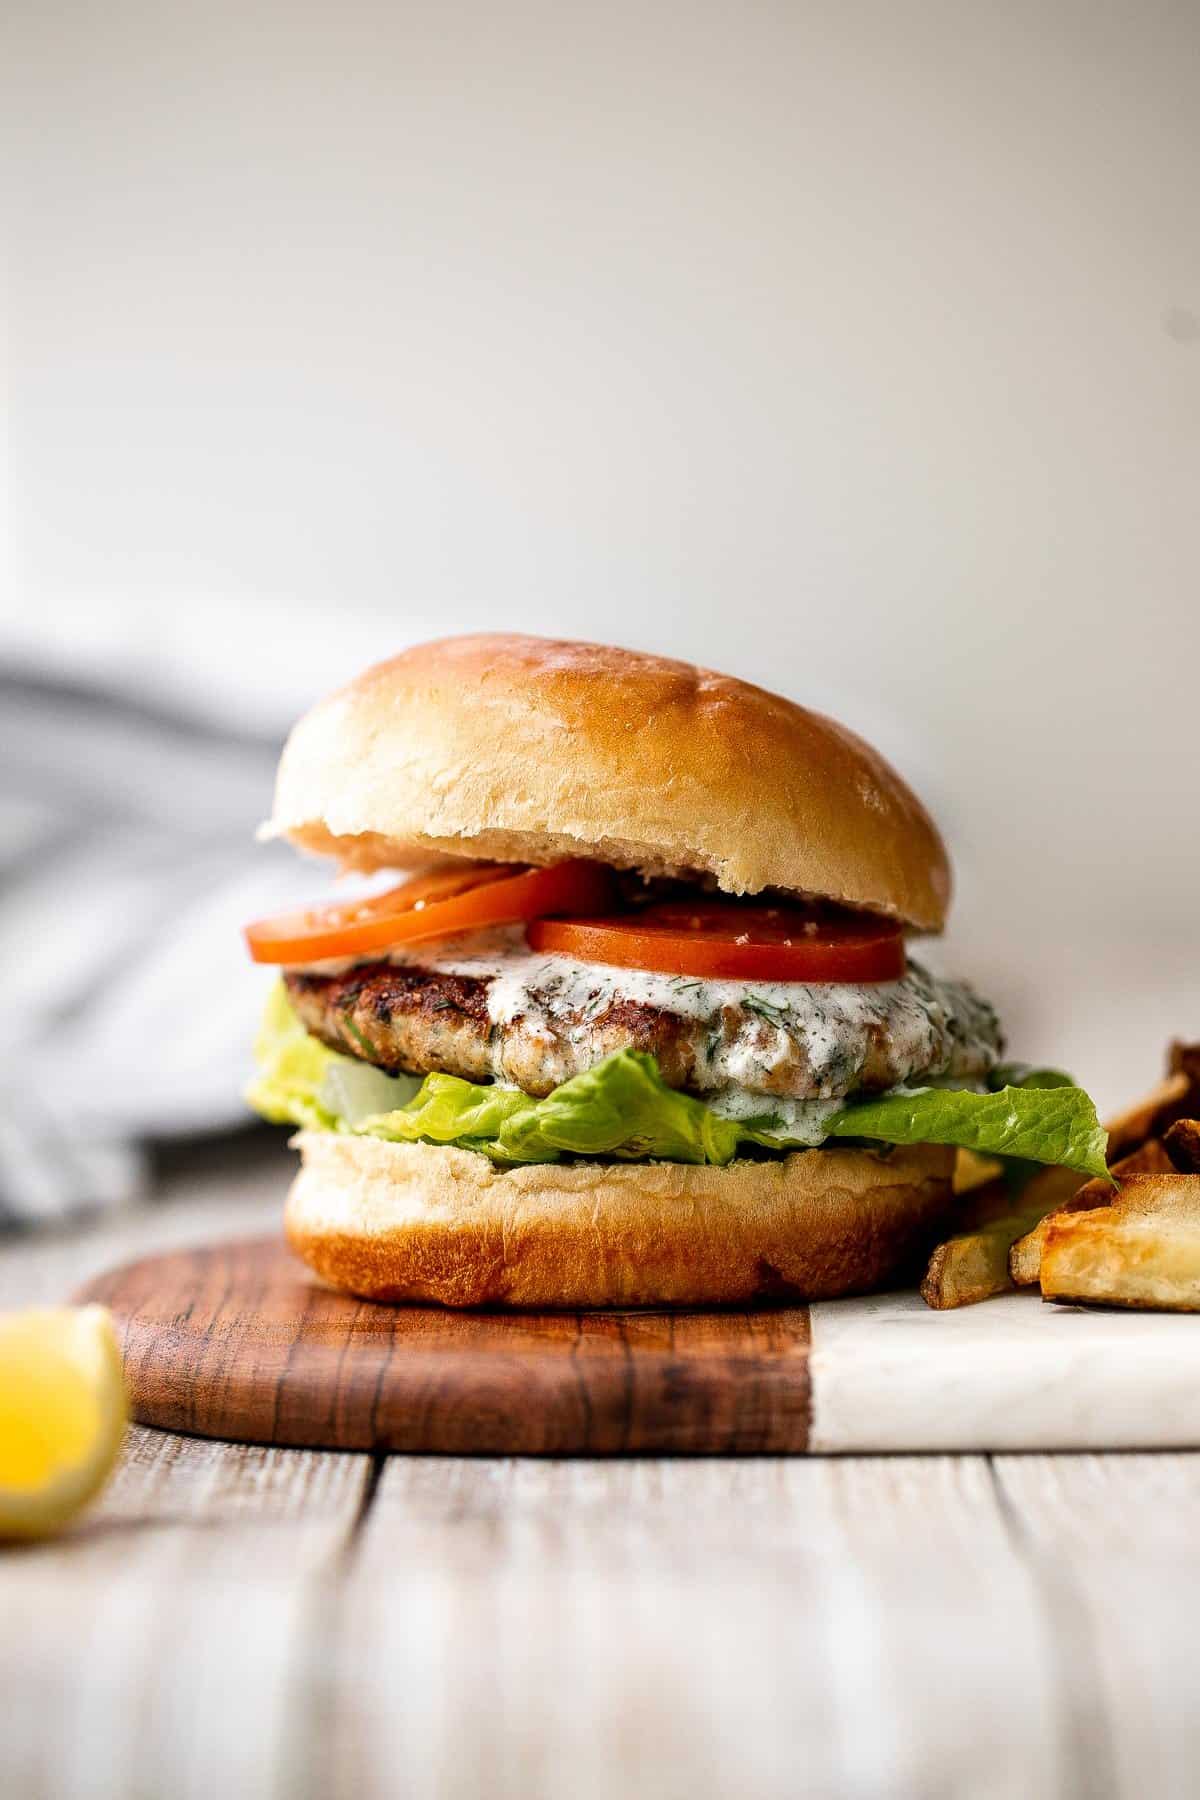 Mediterranean turkey burgers are tender, juicy, and delicious, loaded with garlic, fresh dill, and lemon juice. The perfect summer weeknight meal. | aheadofthyme.com